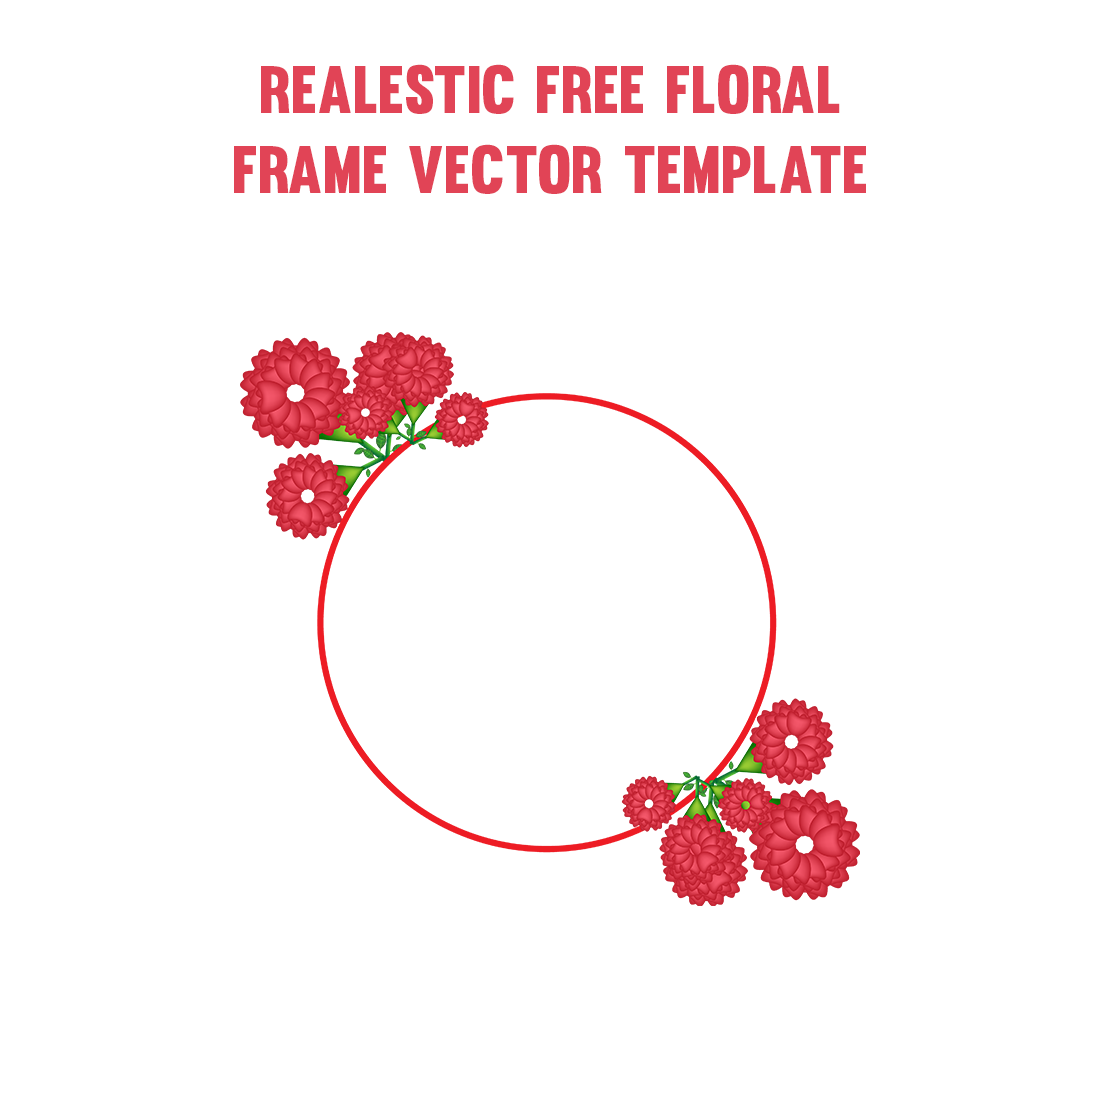 Realestic Free Floral Frame Vector Template preview image.